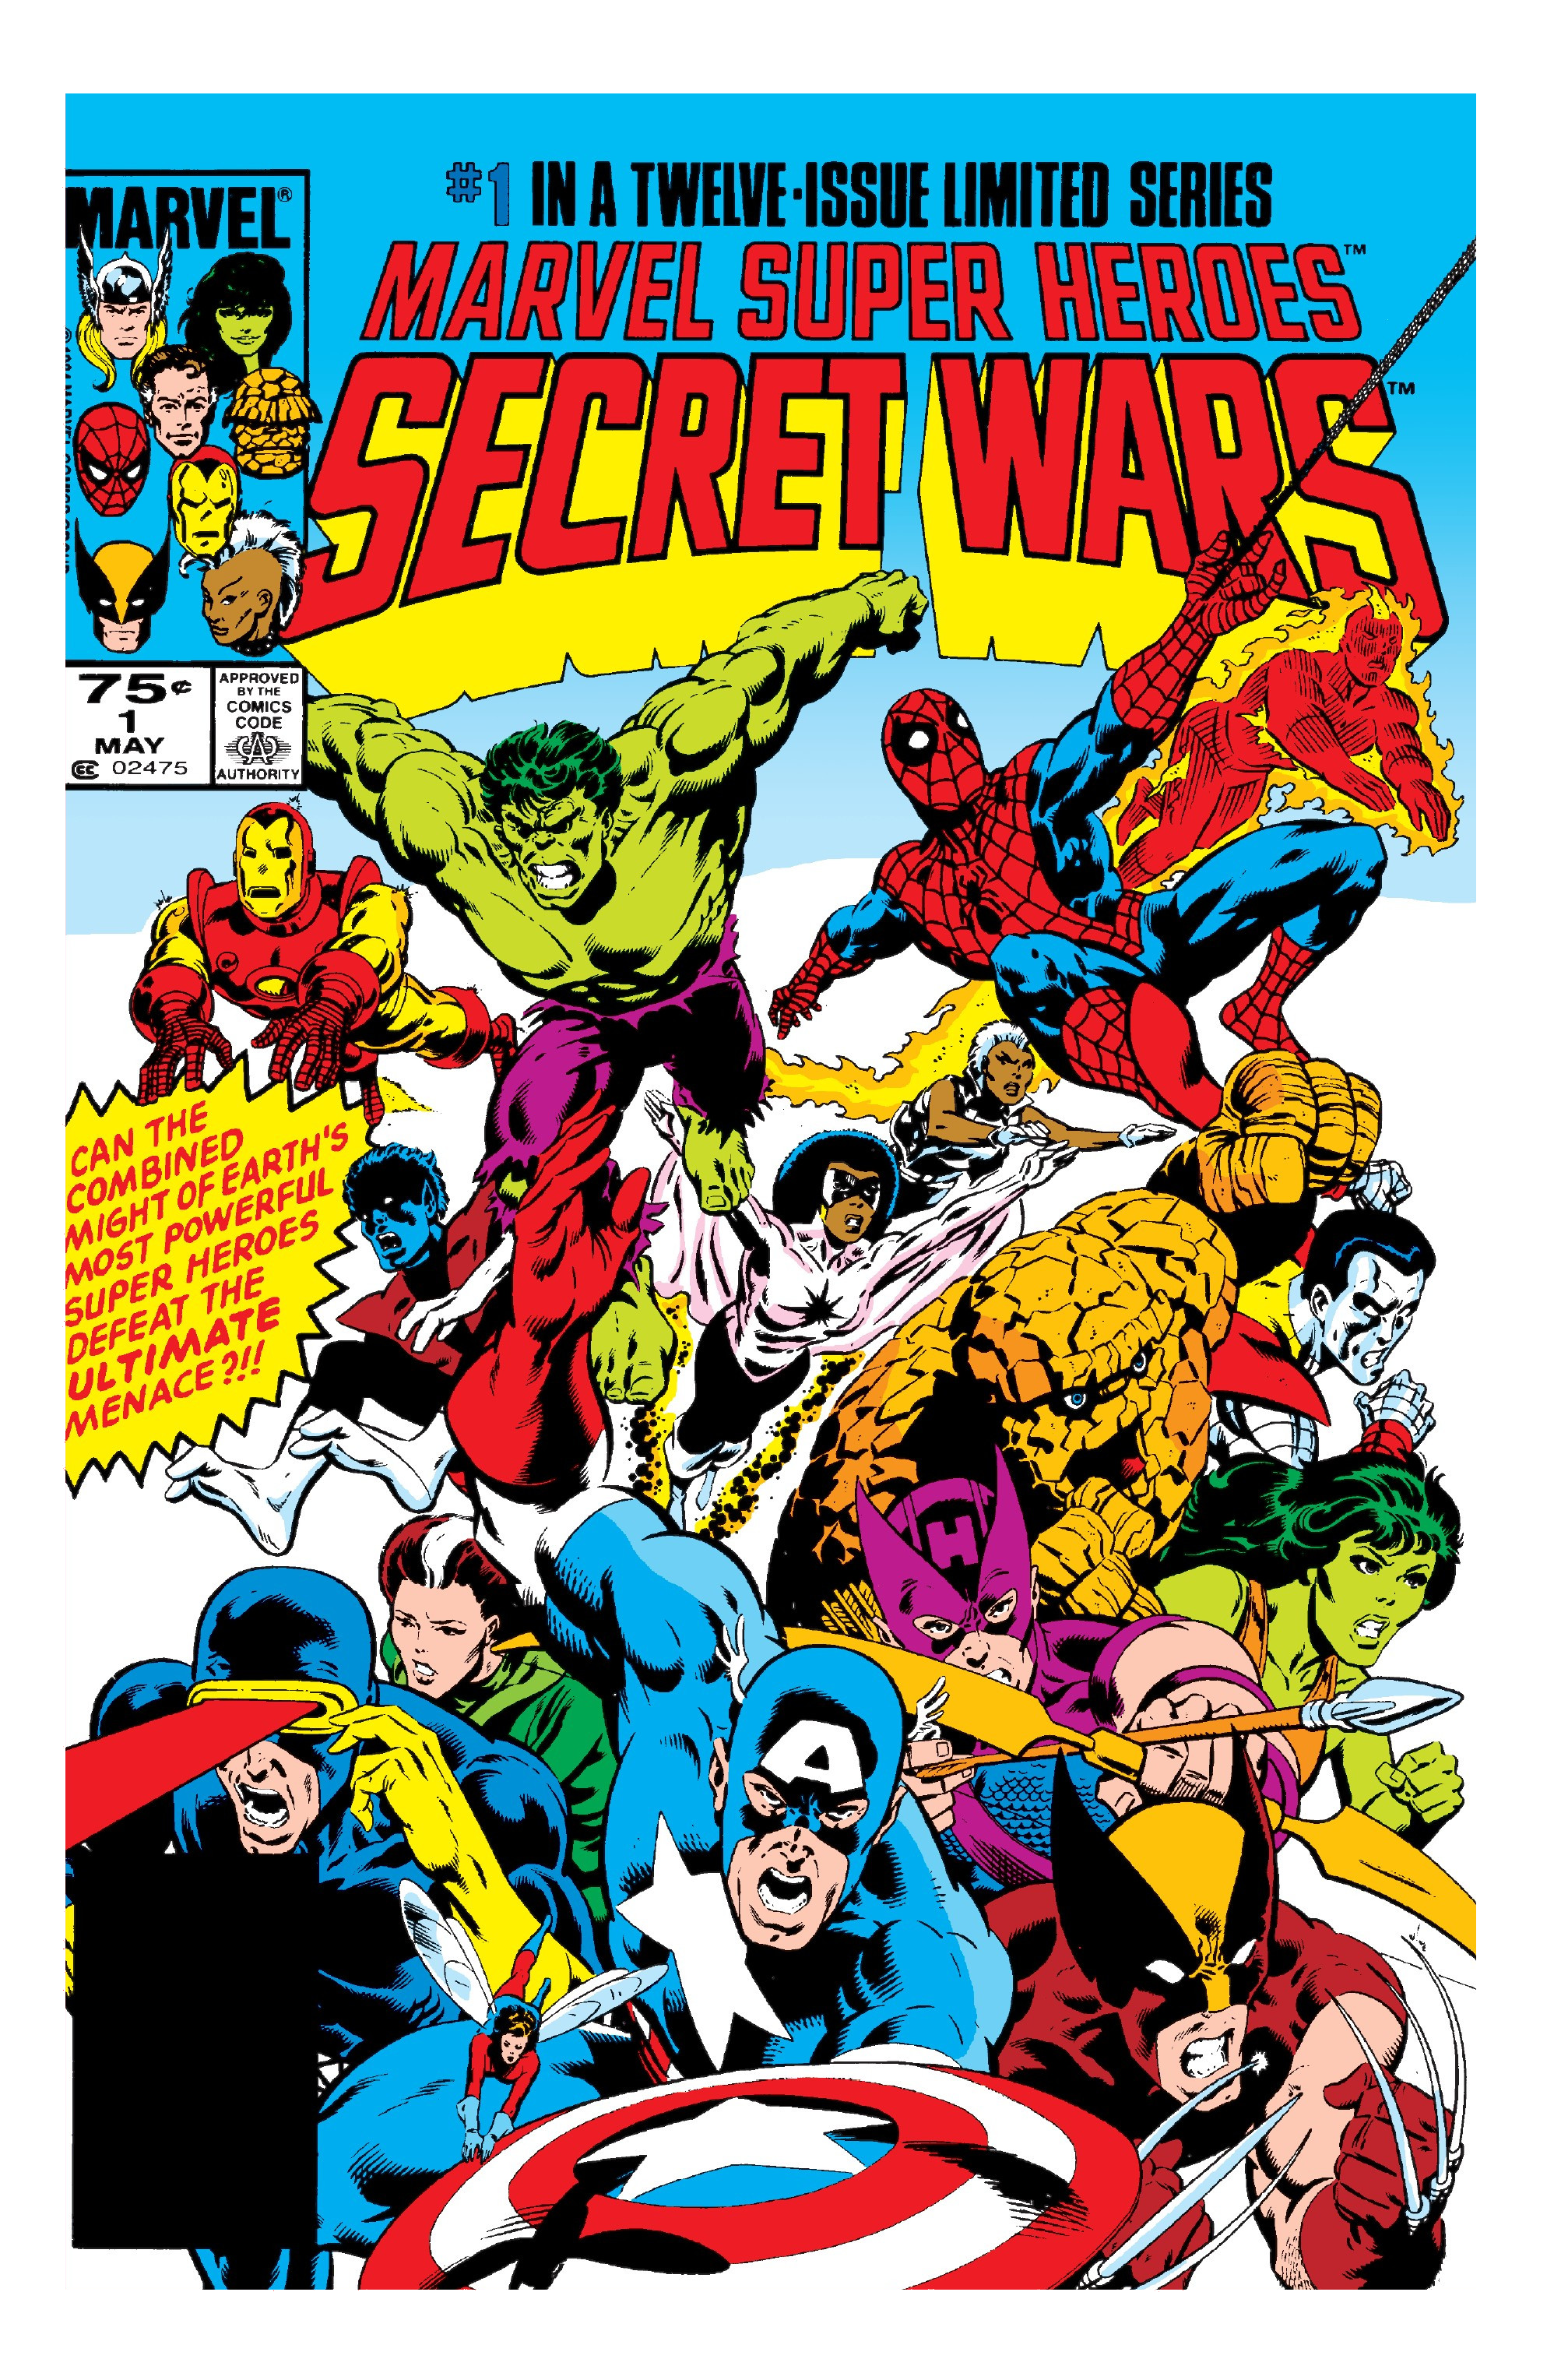 SDCC 2022: Avengers: Secret Wars could give the MCU the power of a